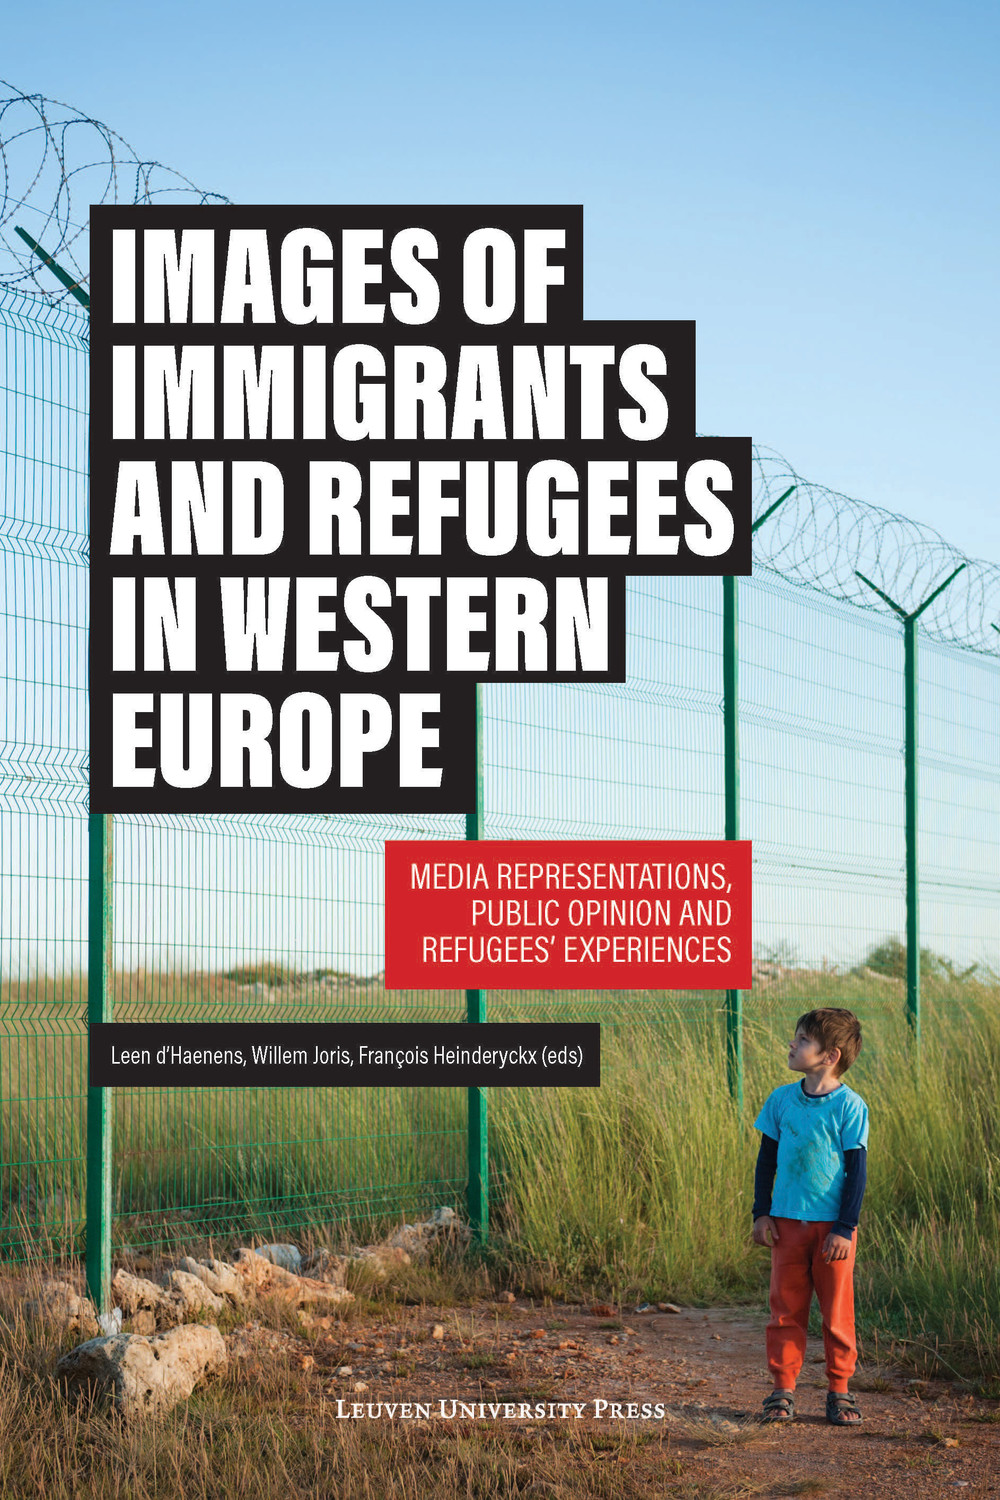 Images of Immigrants and Refugees in Western Europe